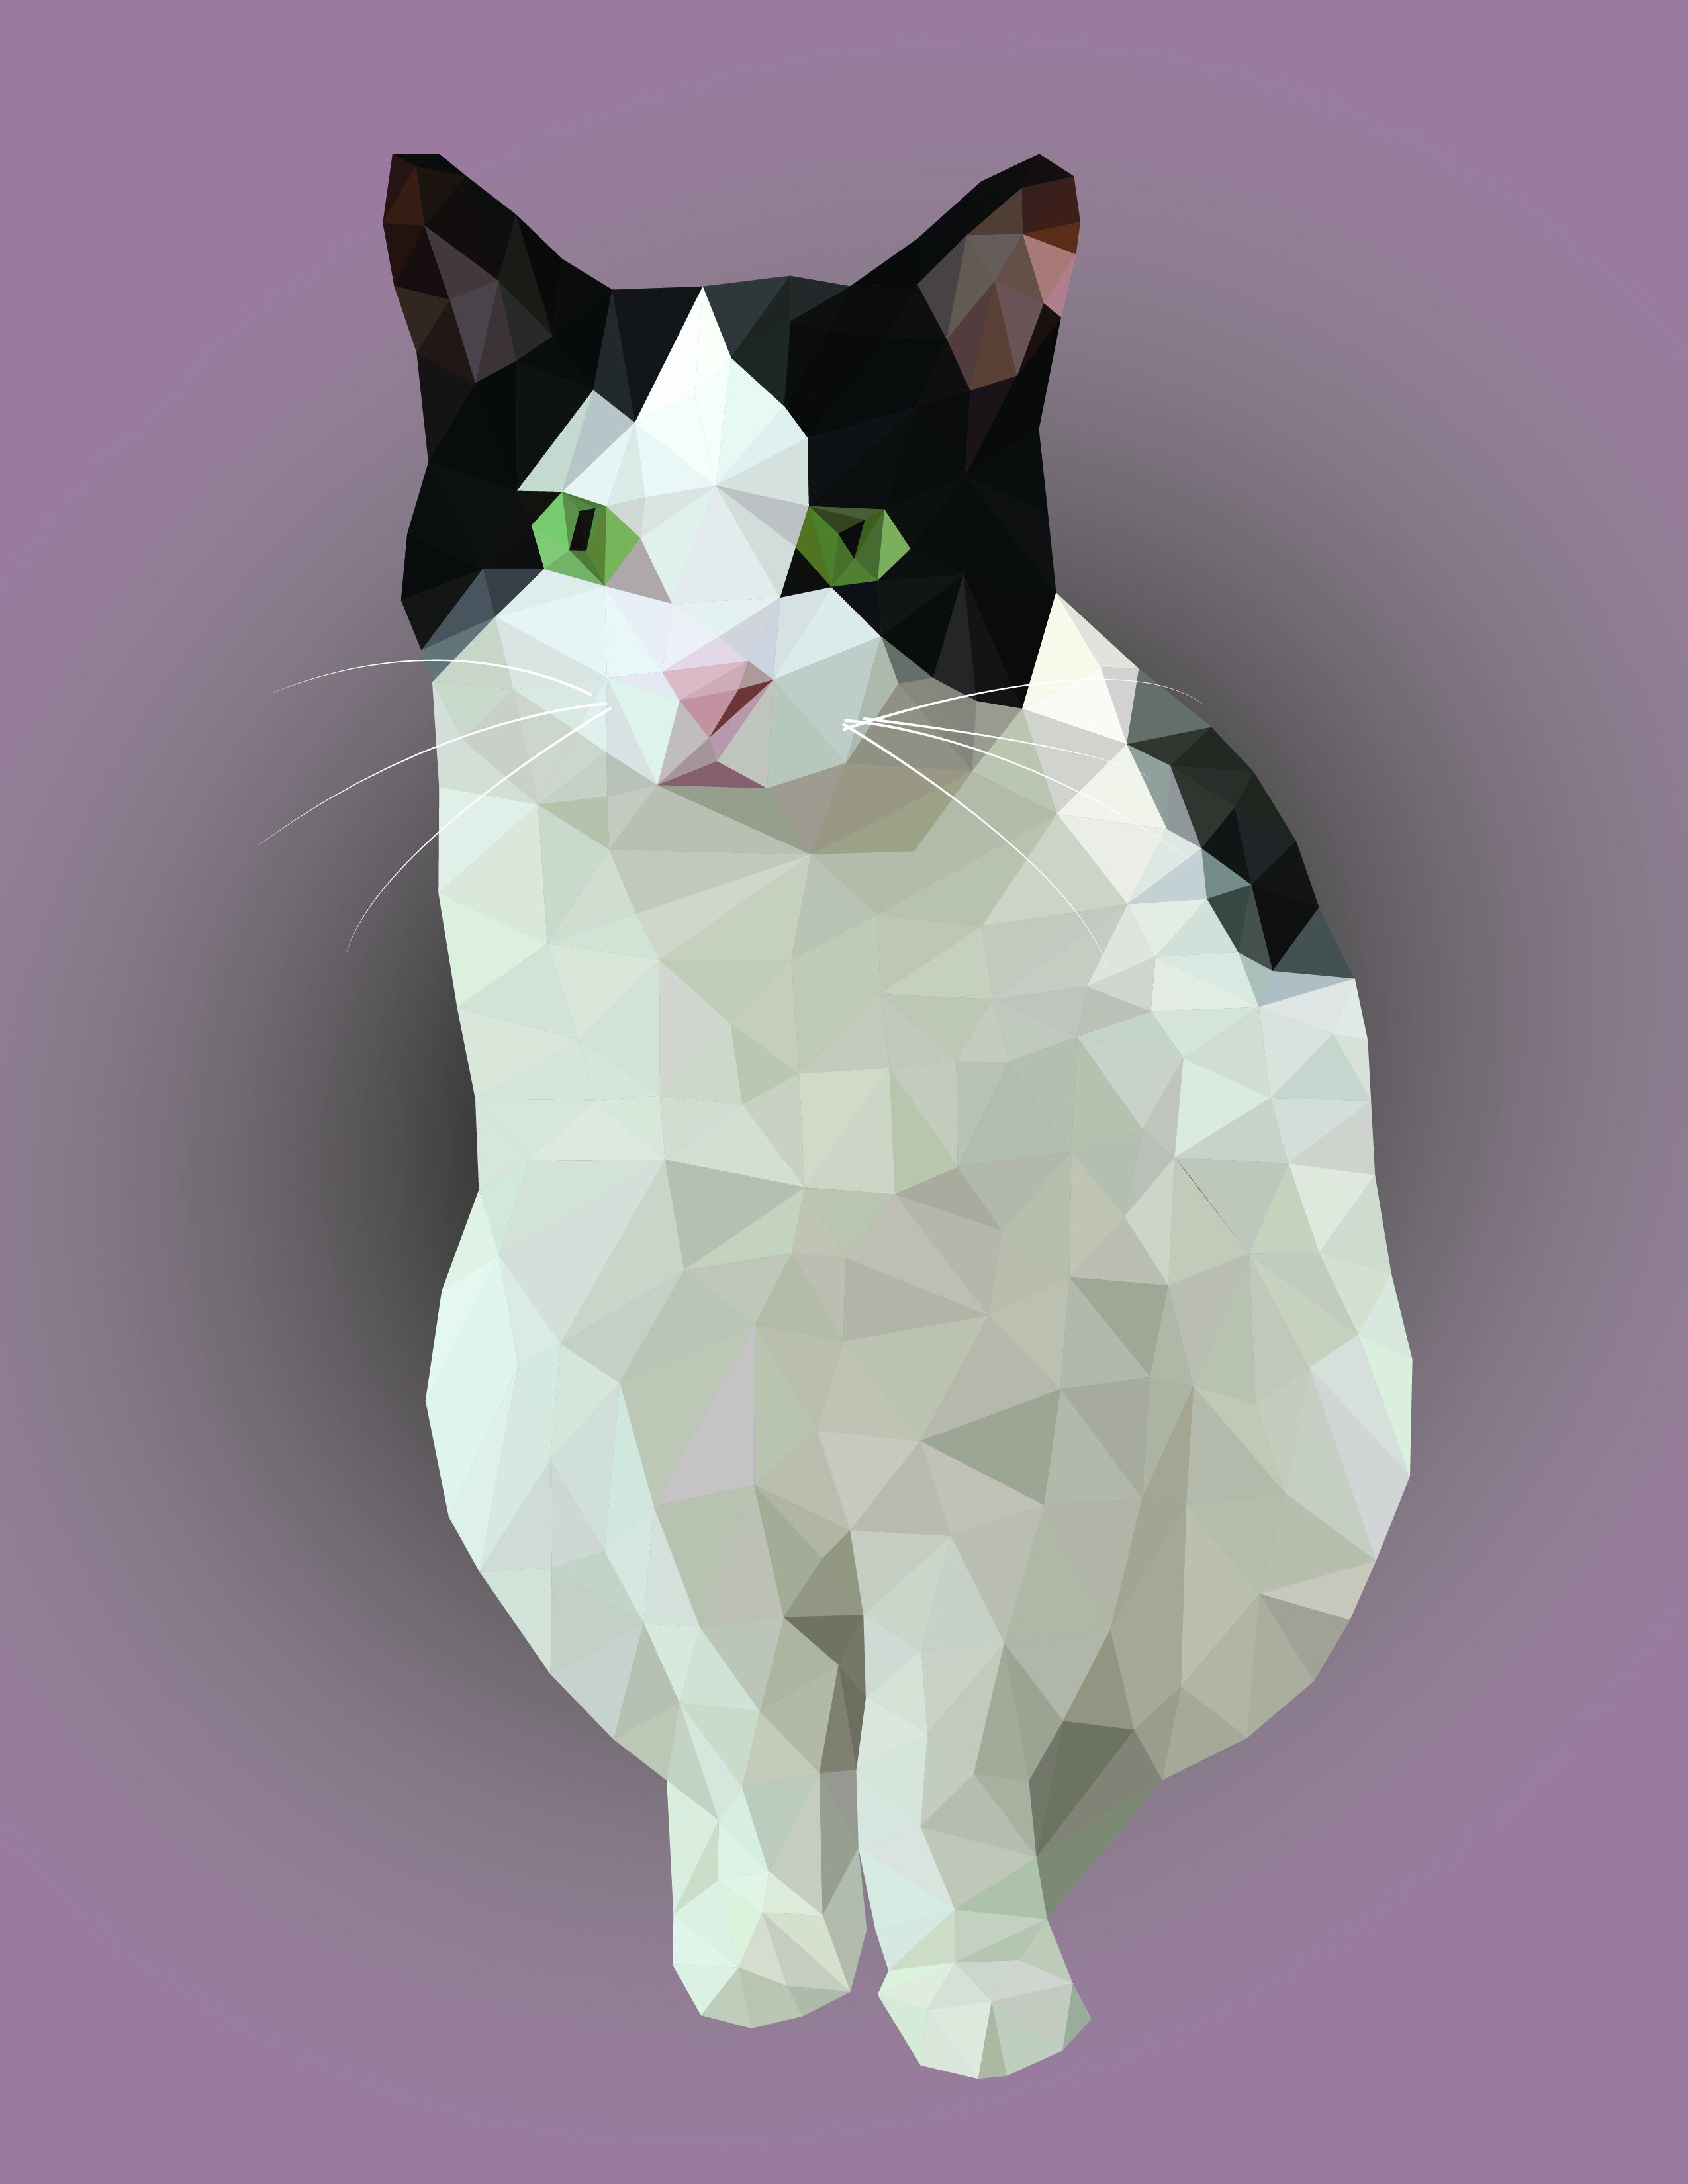 A low poly geometric illustration of a black and white cat on a purple background